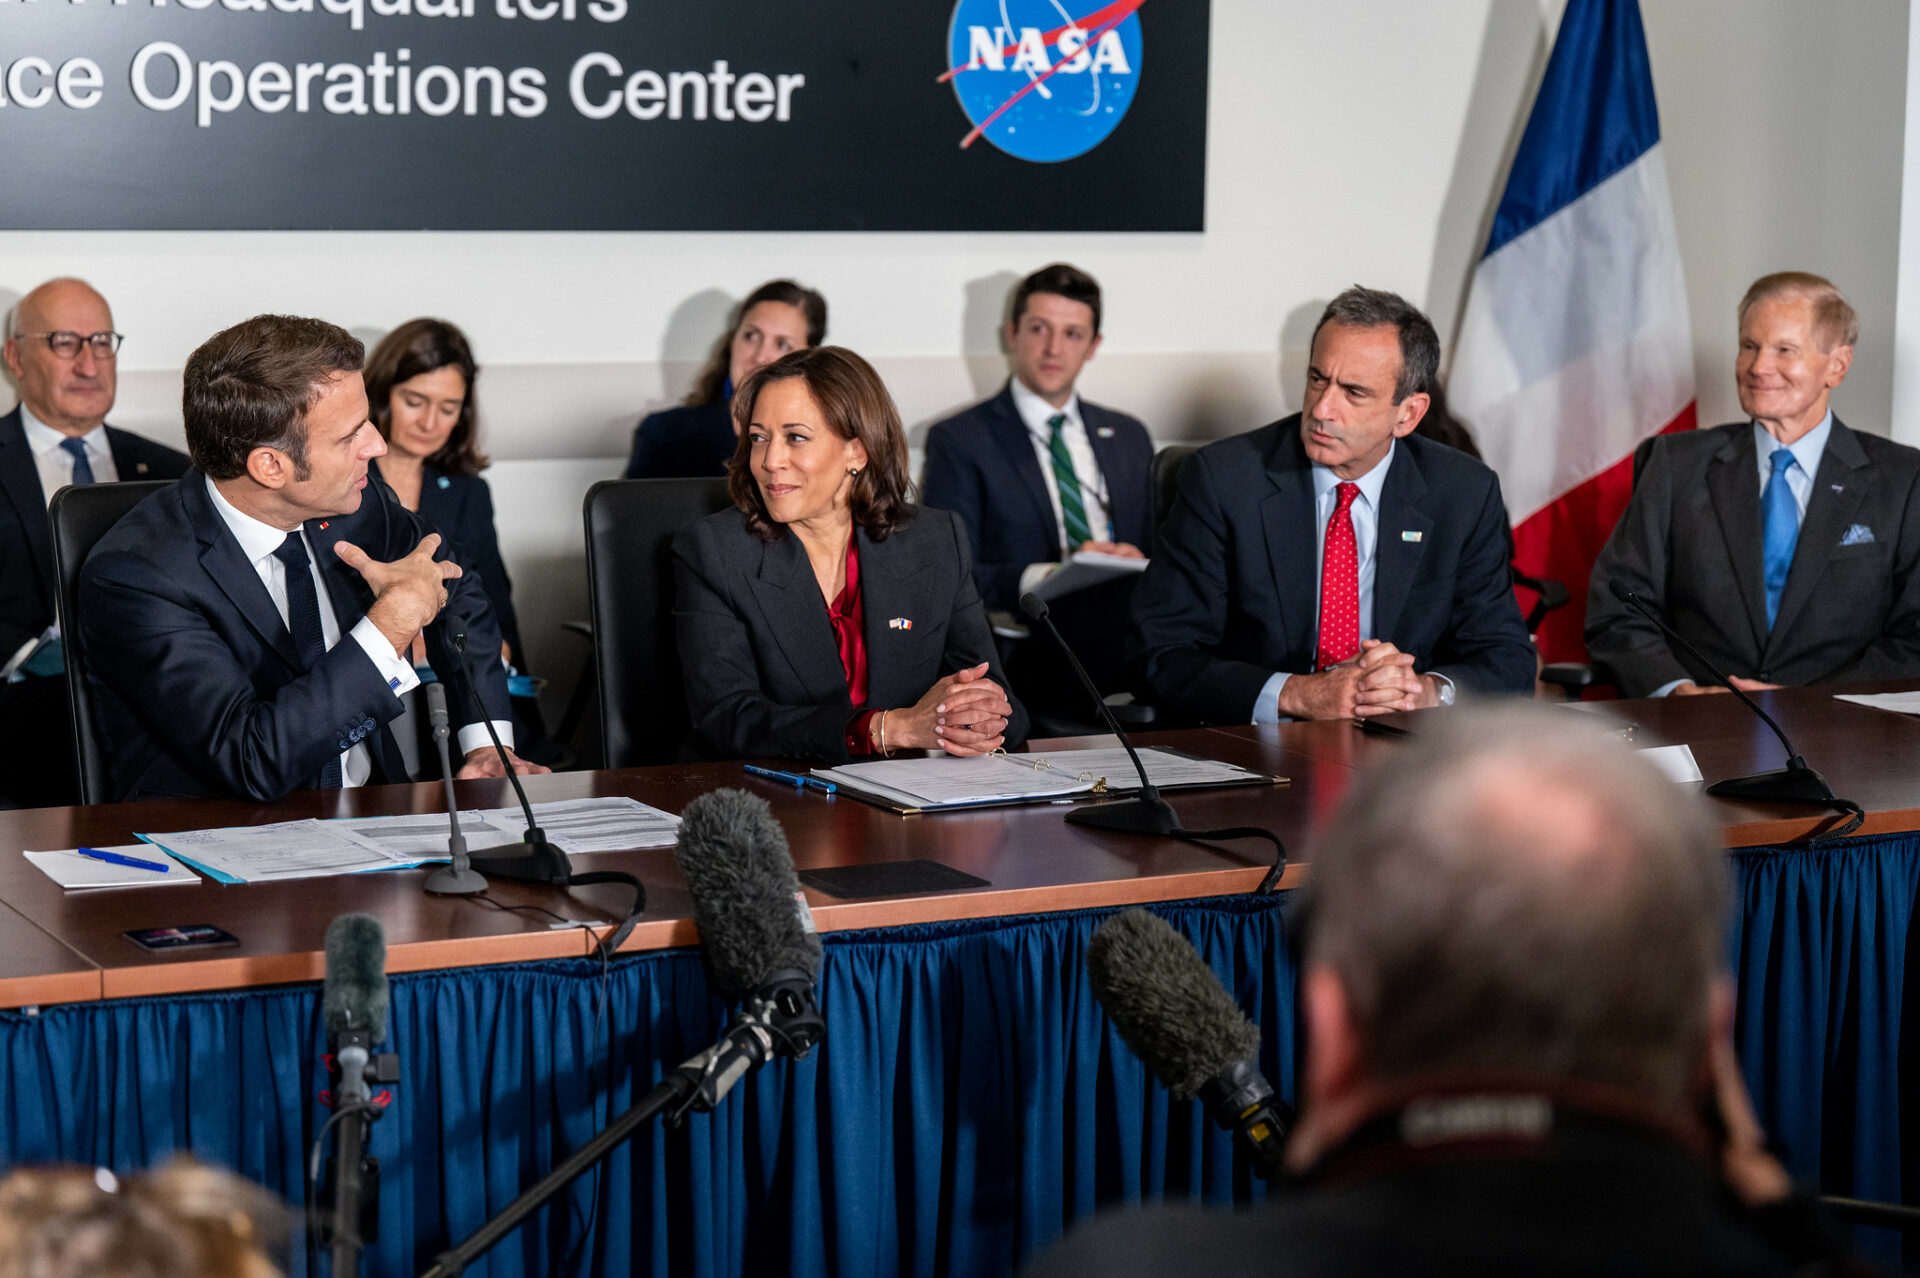 France will cooperate with the United States and abandon anti-satellite weapons